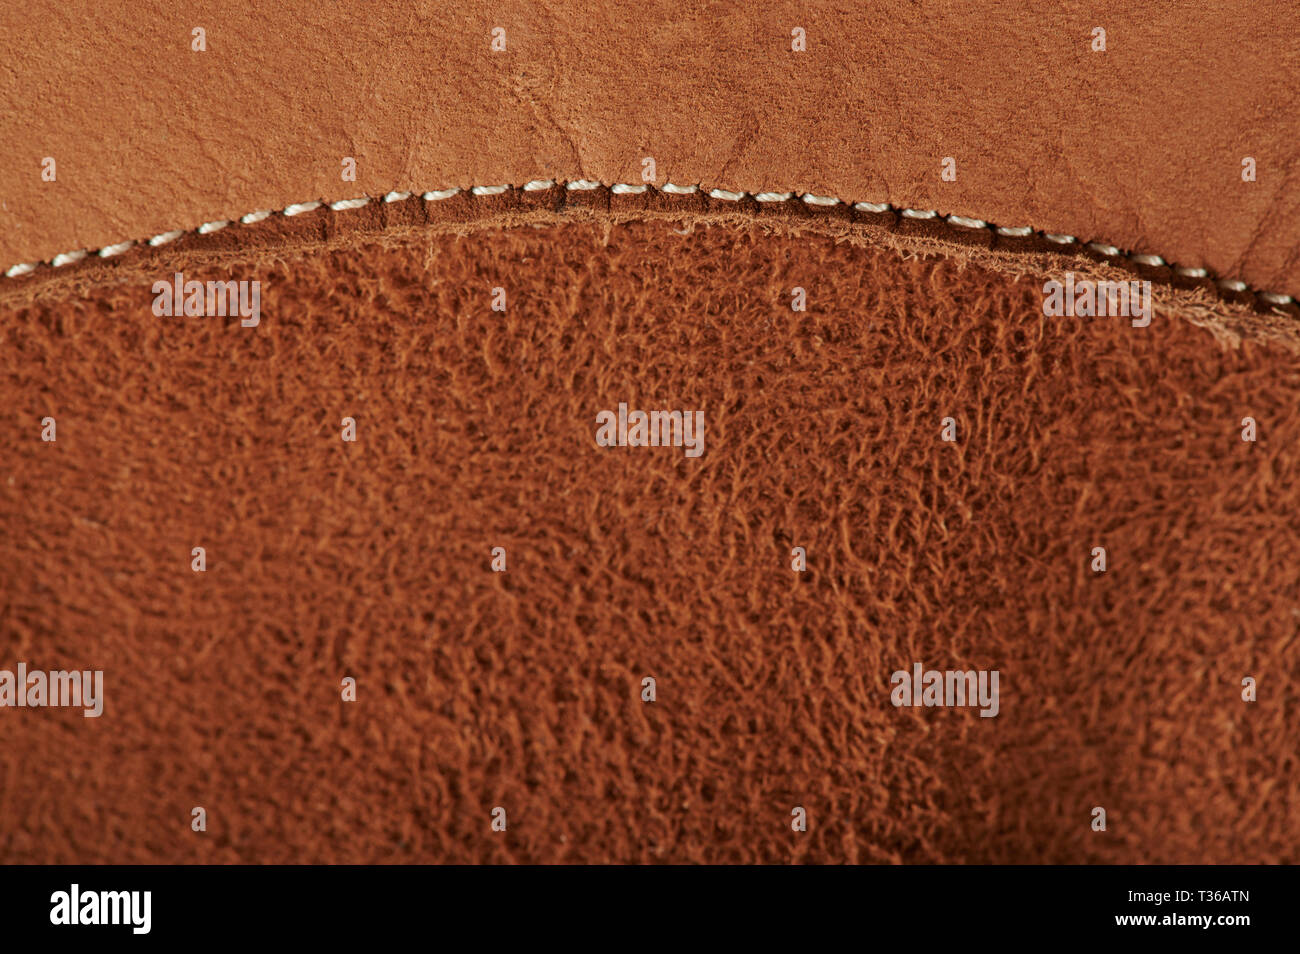 Stitch on brown leather background macro close up view Stock Photo